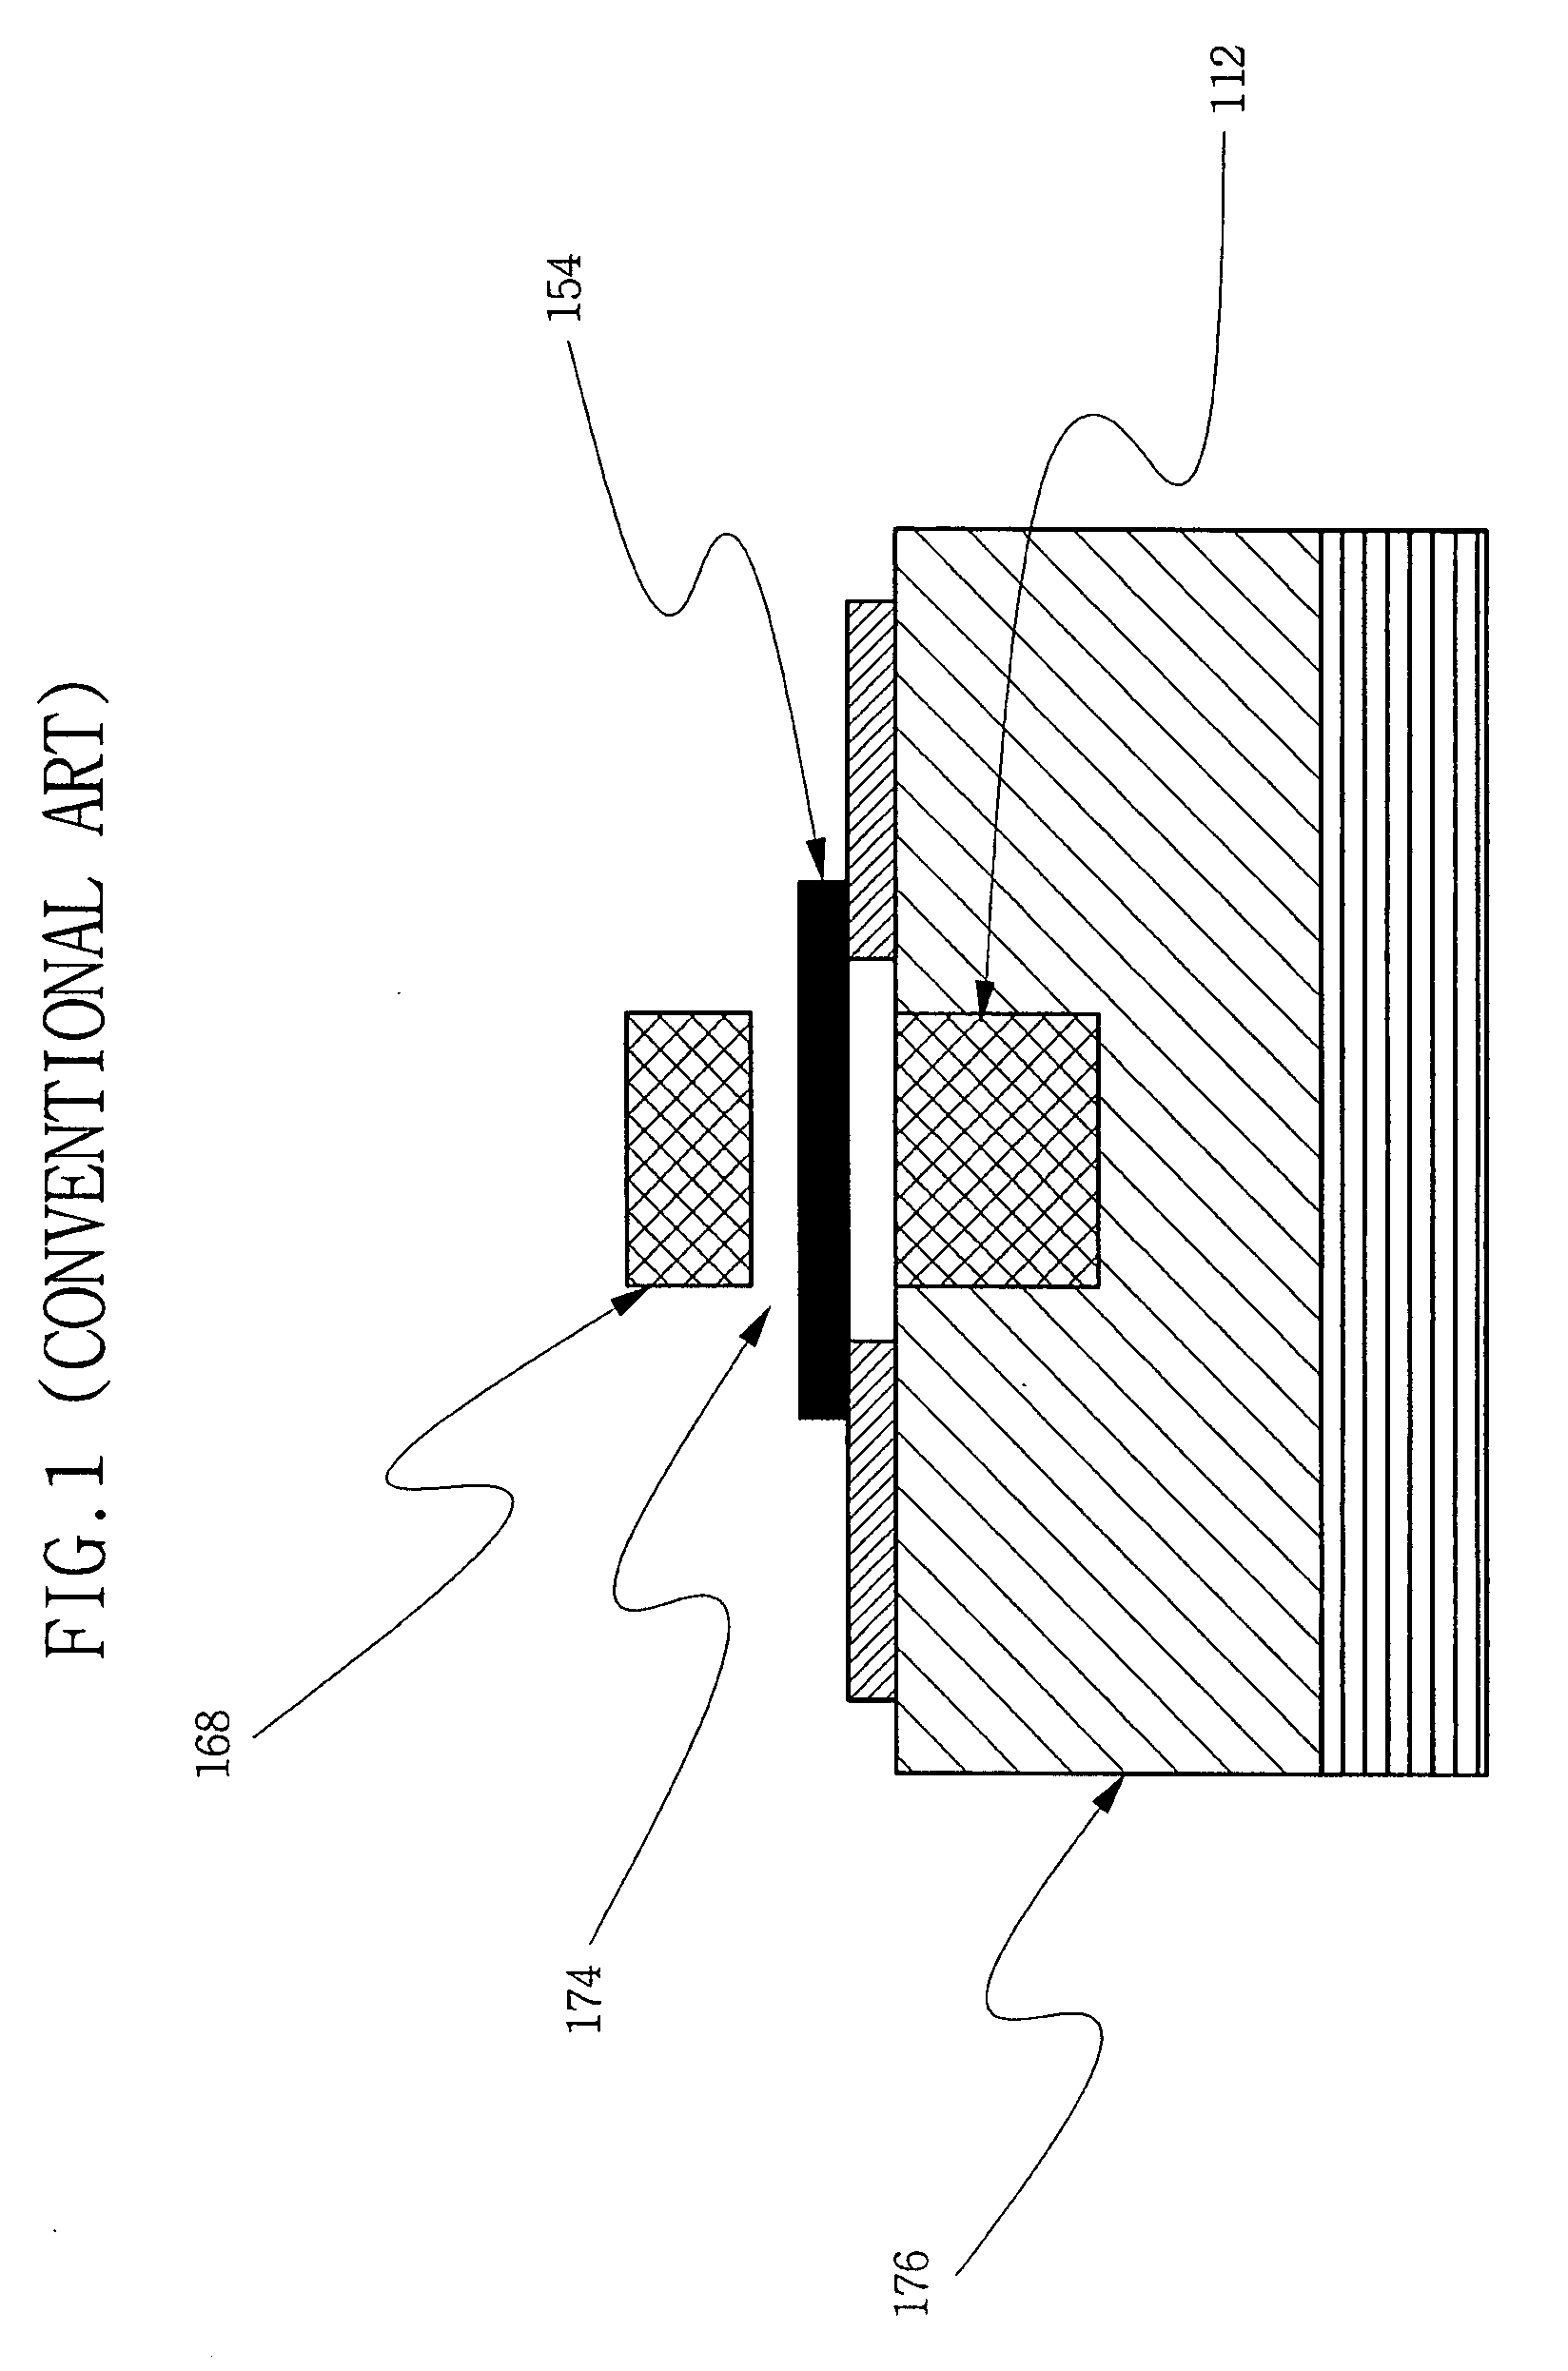 Multi-bit electromechanical memory devices and methods of manufacturing the same